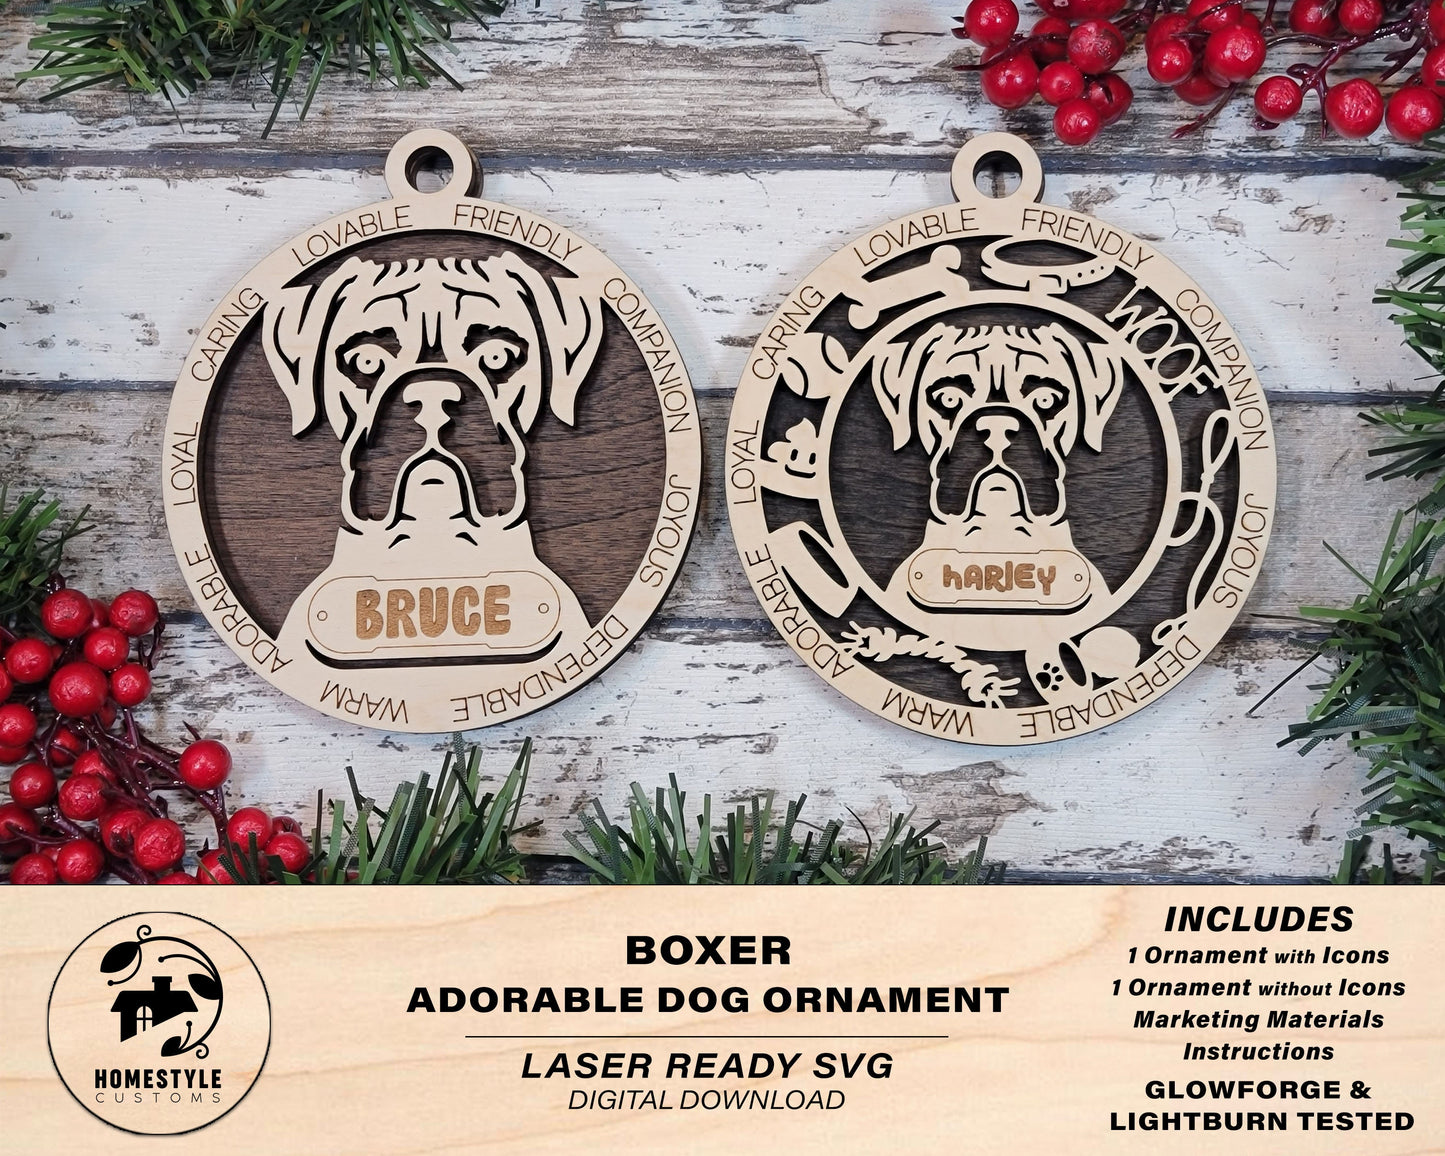 Boxer - Adorable Dog Ornaments - 2 Ornaments included - SVG, PDF, AI File Download - Sized for Glowforge